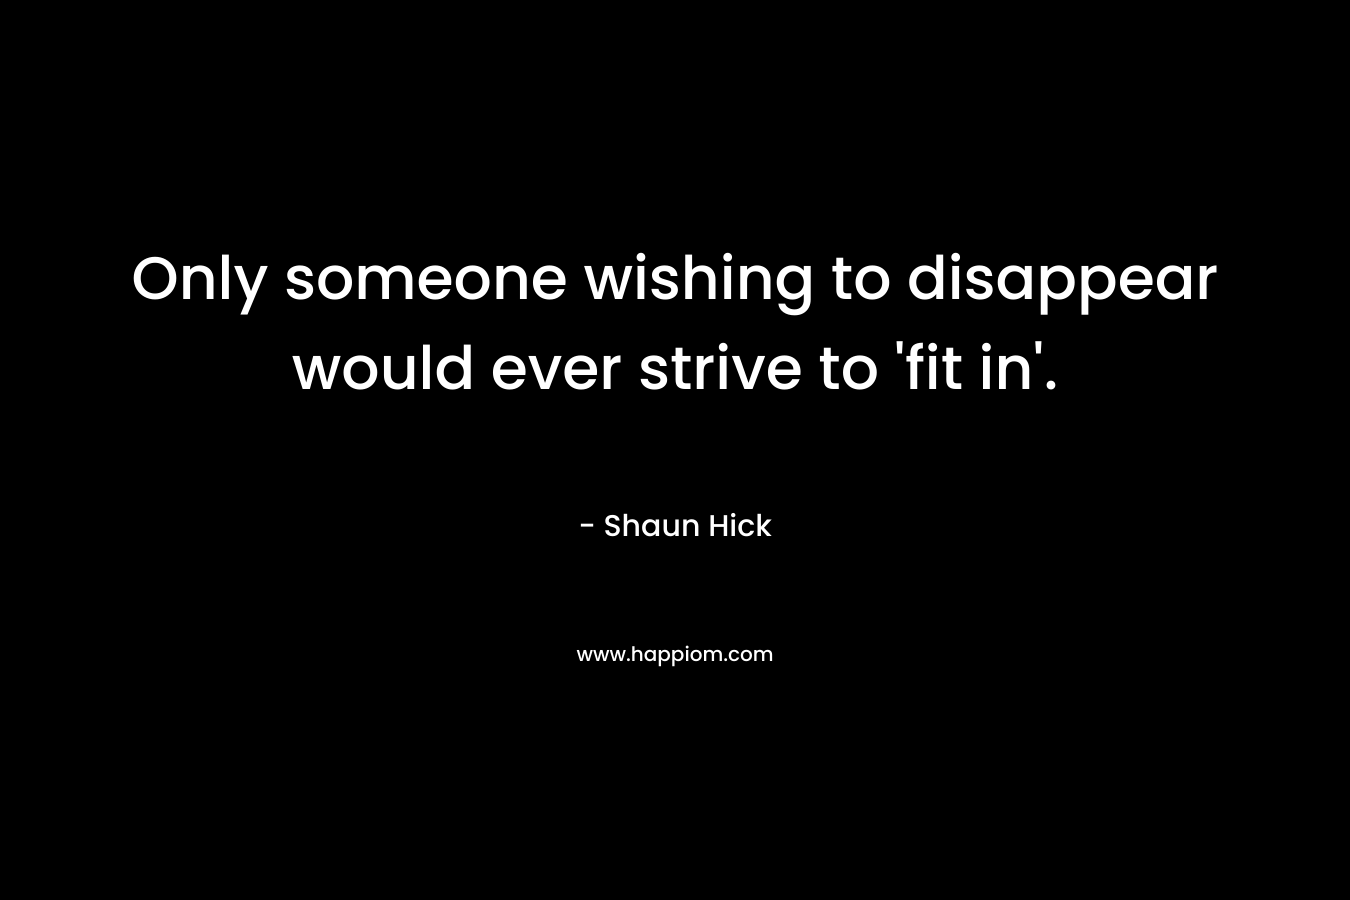 Only someone wishing to disappear would ever strive to ‘fit in’. – Shaun Hick